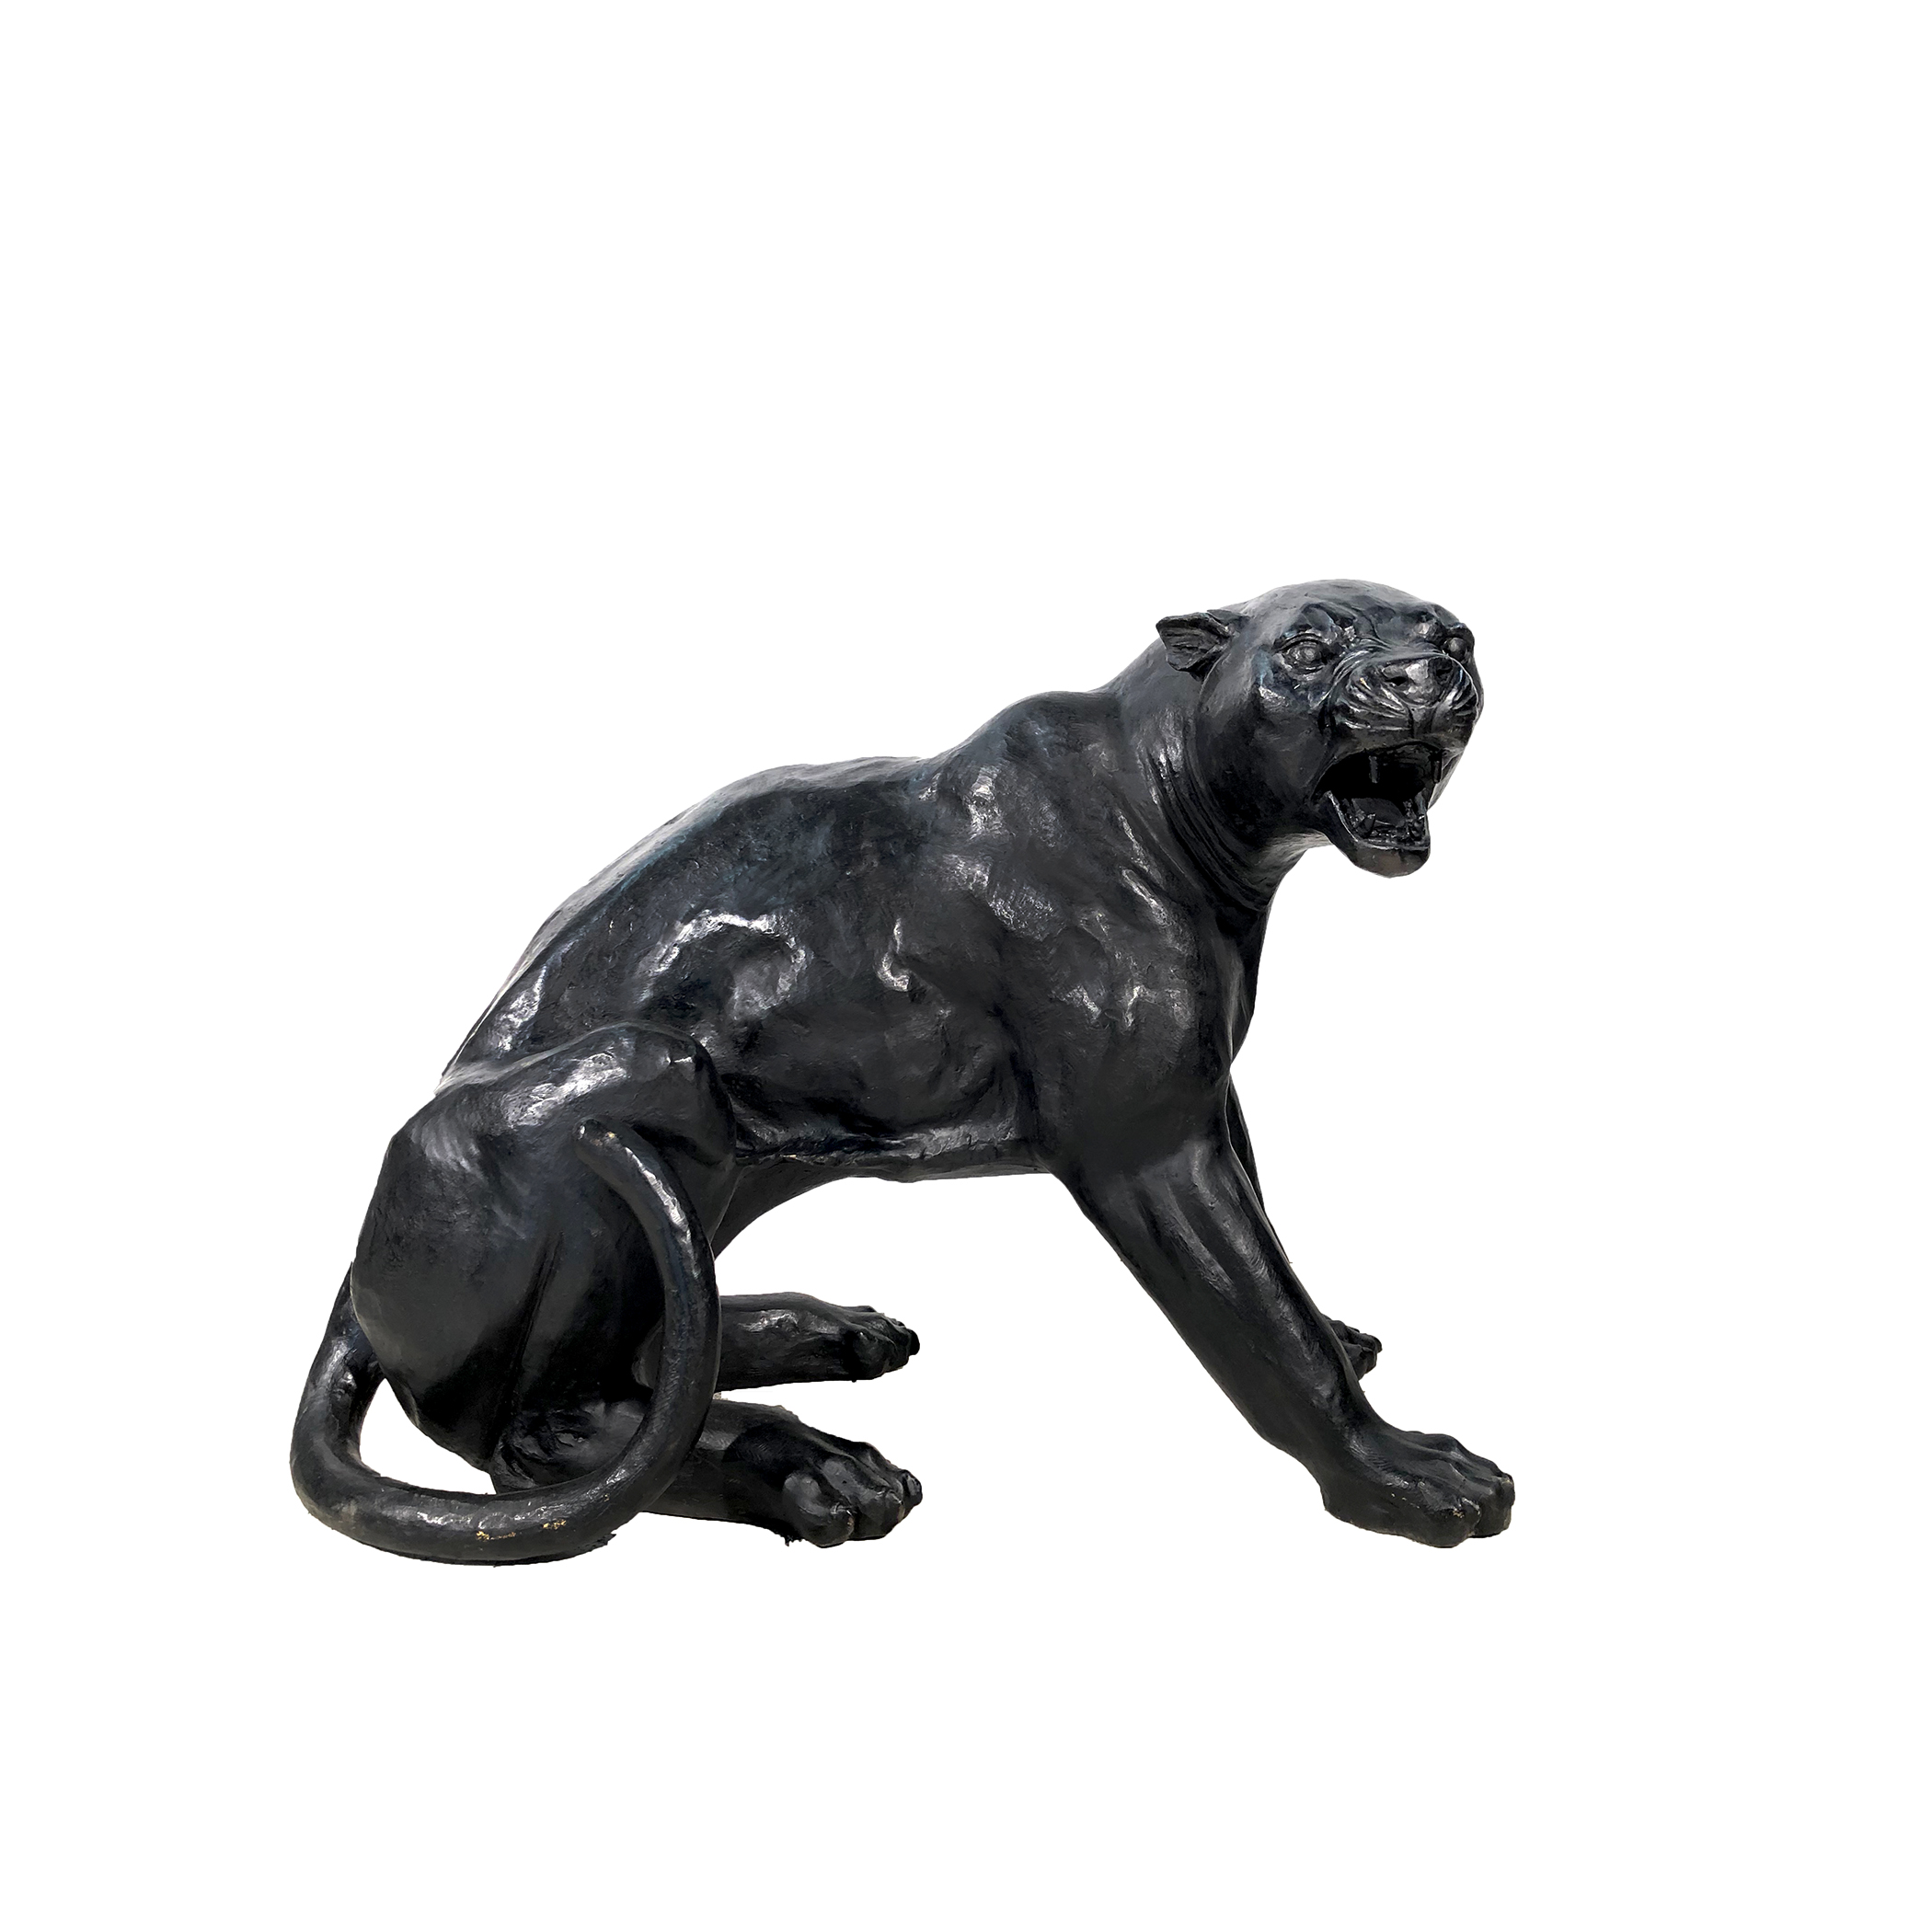 SRB702860-B Bronze Fighting Black Panther Sculpture by Metropolitan Galleries Inc Head Facing Right